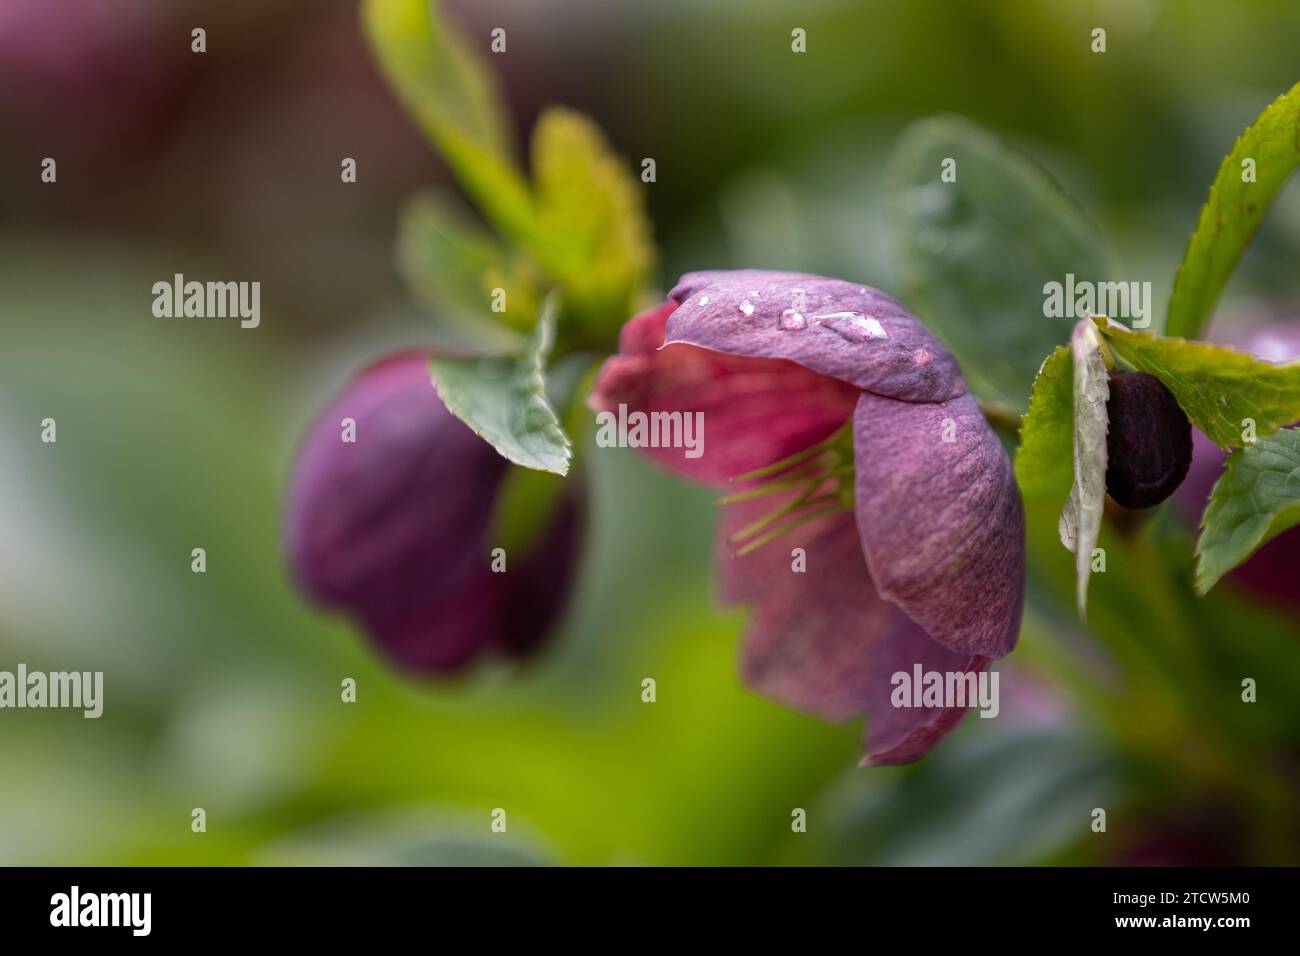 Close-up of a purple Christmas rose (Helleborus niger) with blurred background Stock Photo